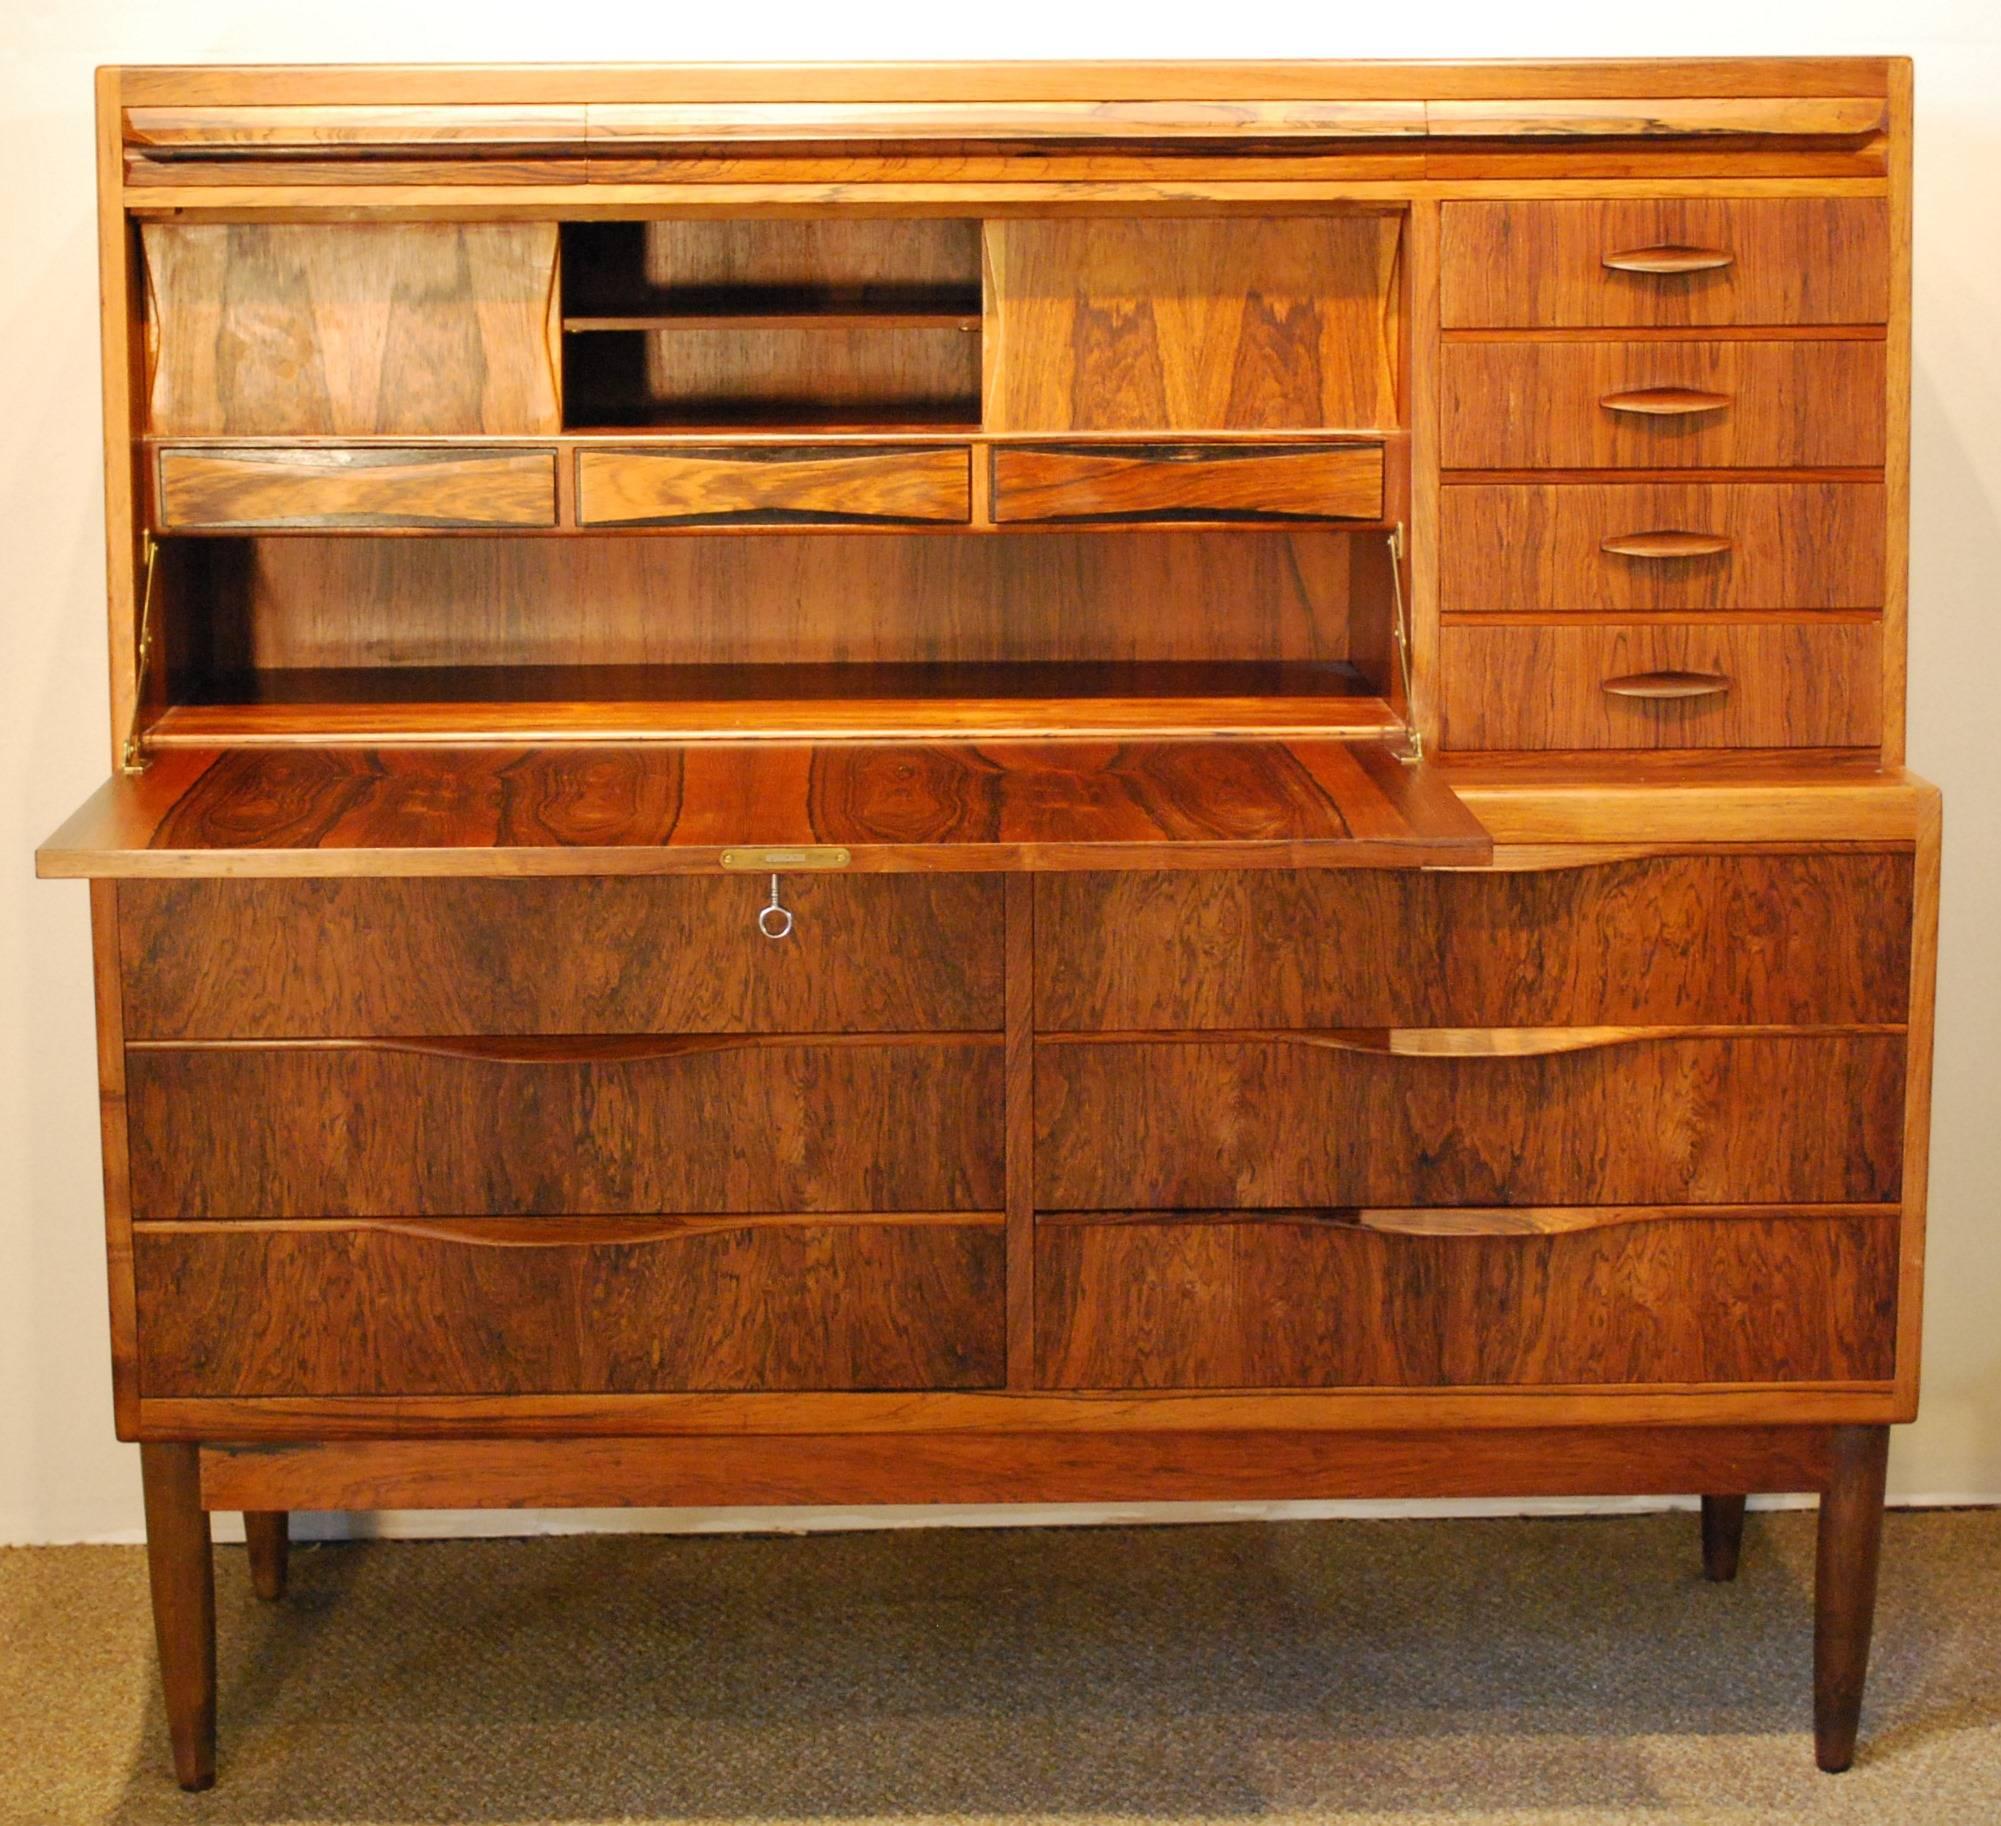 An Erling Torvits designed rosewood secretaire produced at Klim Møbelfabrik in the 1960s, this rare Danish Modern secretary desk is crafted from Brazilian rosewood with a locking desk surface that folds down to reveal three bow tie drawers below two